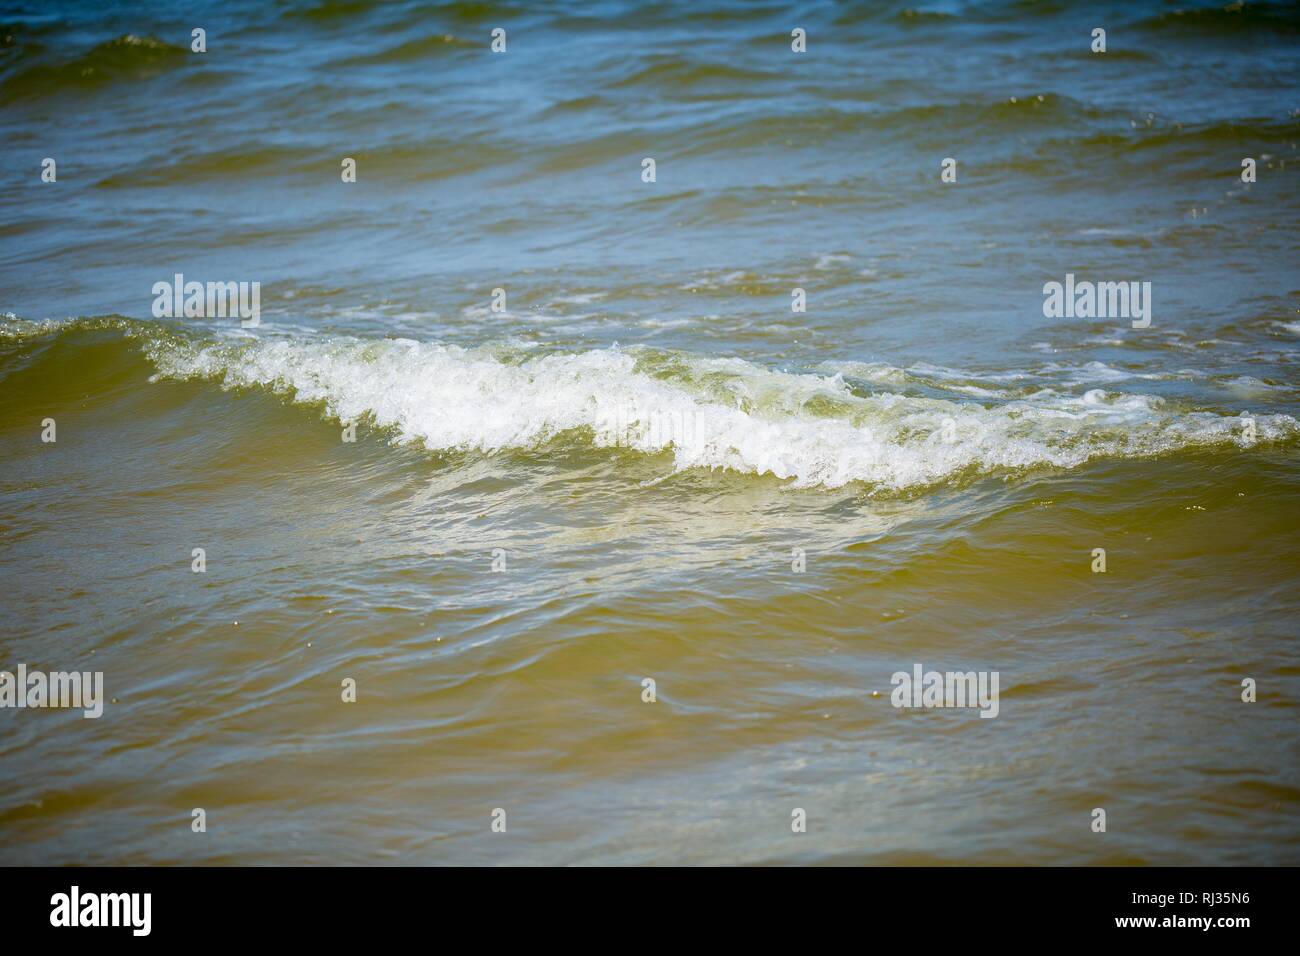 Sea Waves breaking on shore. Baltic Sea waves in close up. Stock Photo